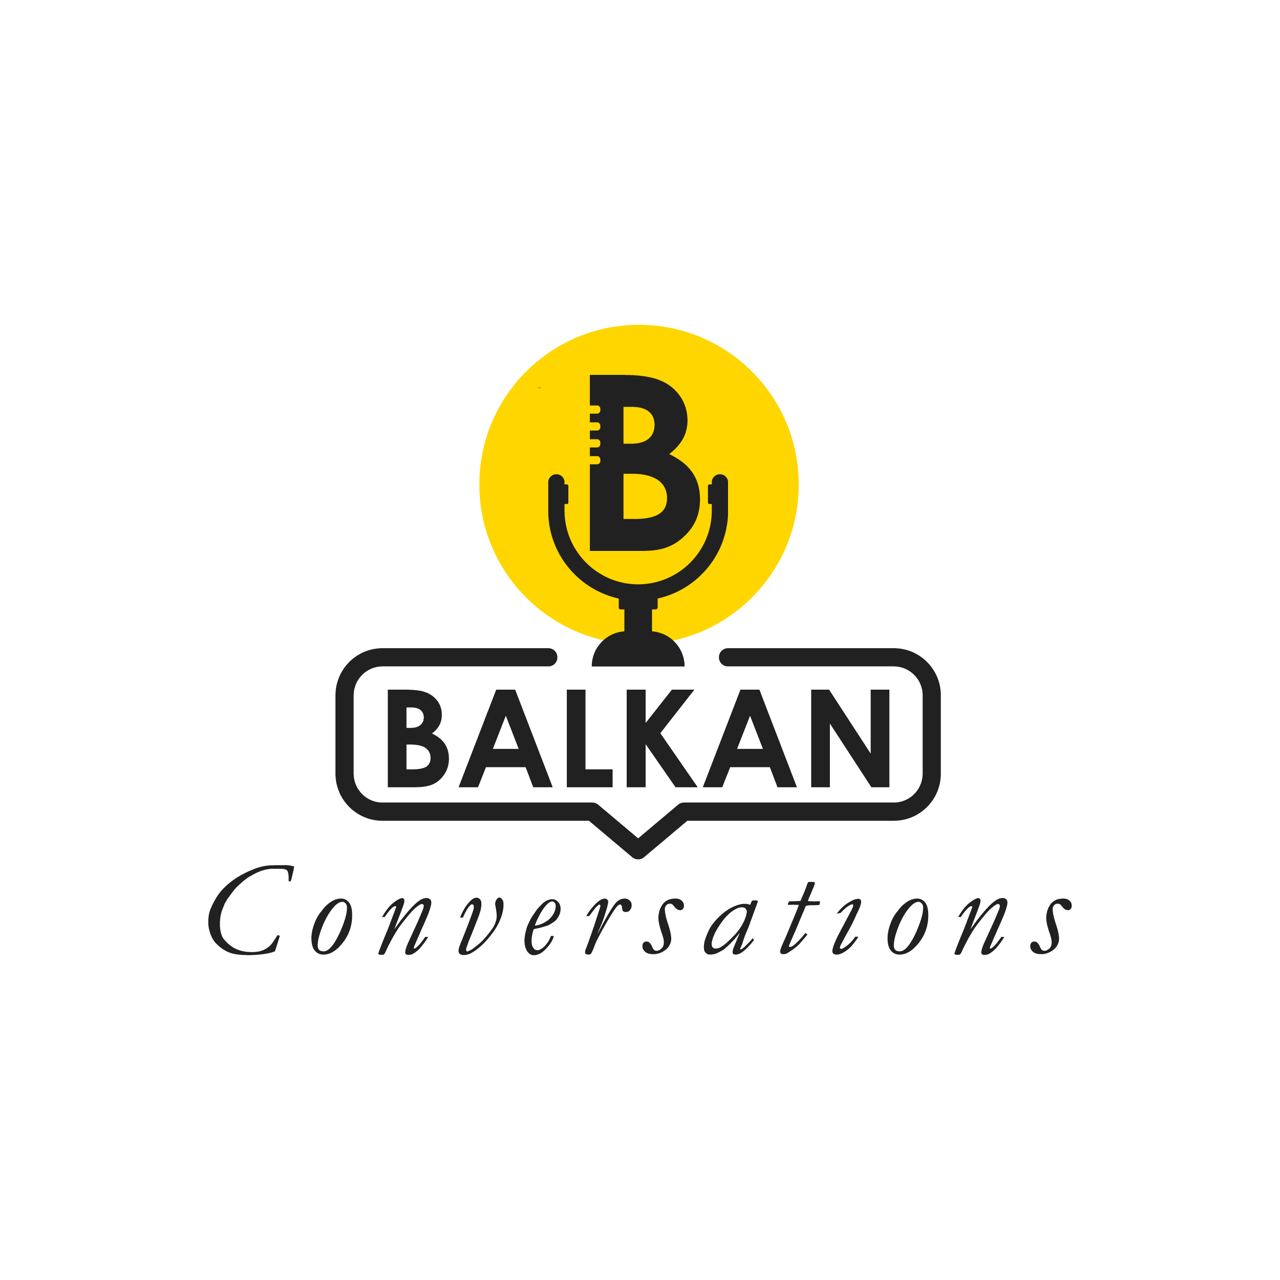 Balkan Conversations: What's Going On With US Government Involvement In Region?